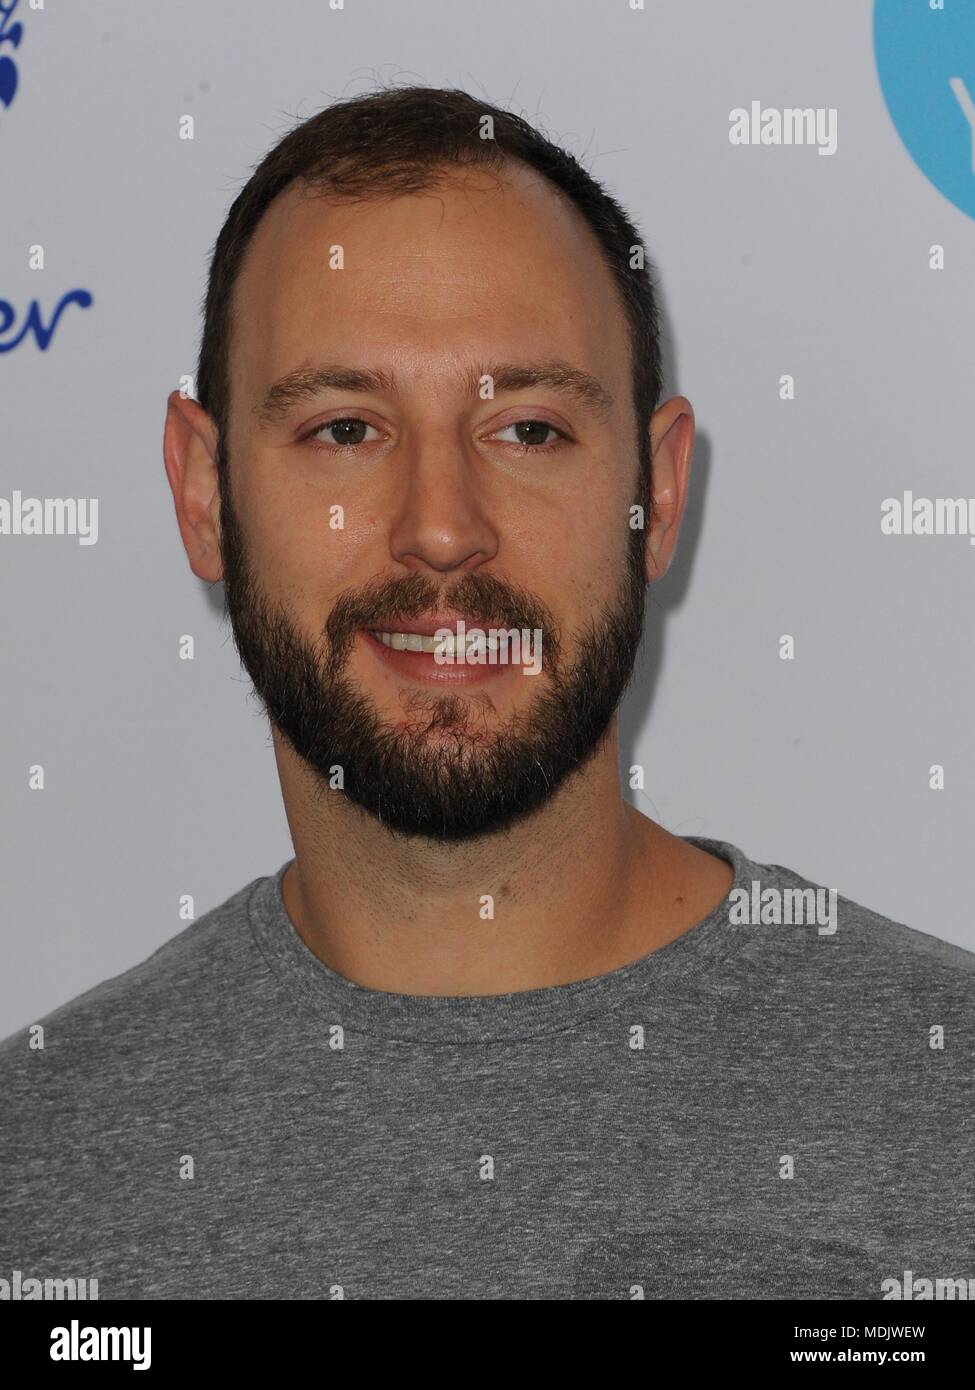 Los Angeles, CA, USA. 19th Apr, 2018. Evan Goldberg at arrivals for WE Day California, The Forum, Los Angeles, CA April 19, 2018. Credit: Elizabeth Goodenough/Everett Collection/Alamy Live News Stock Photo